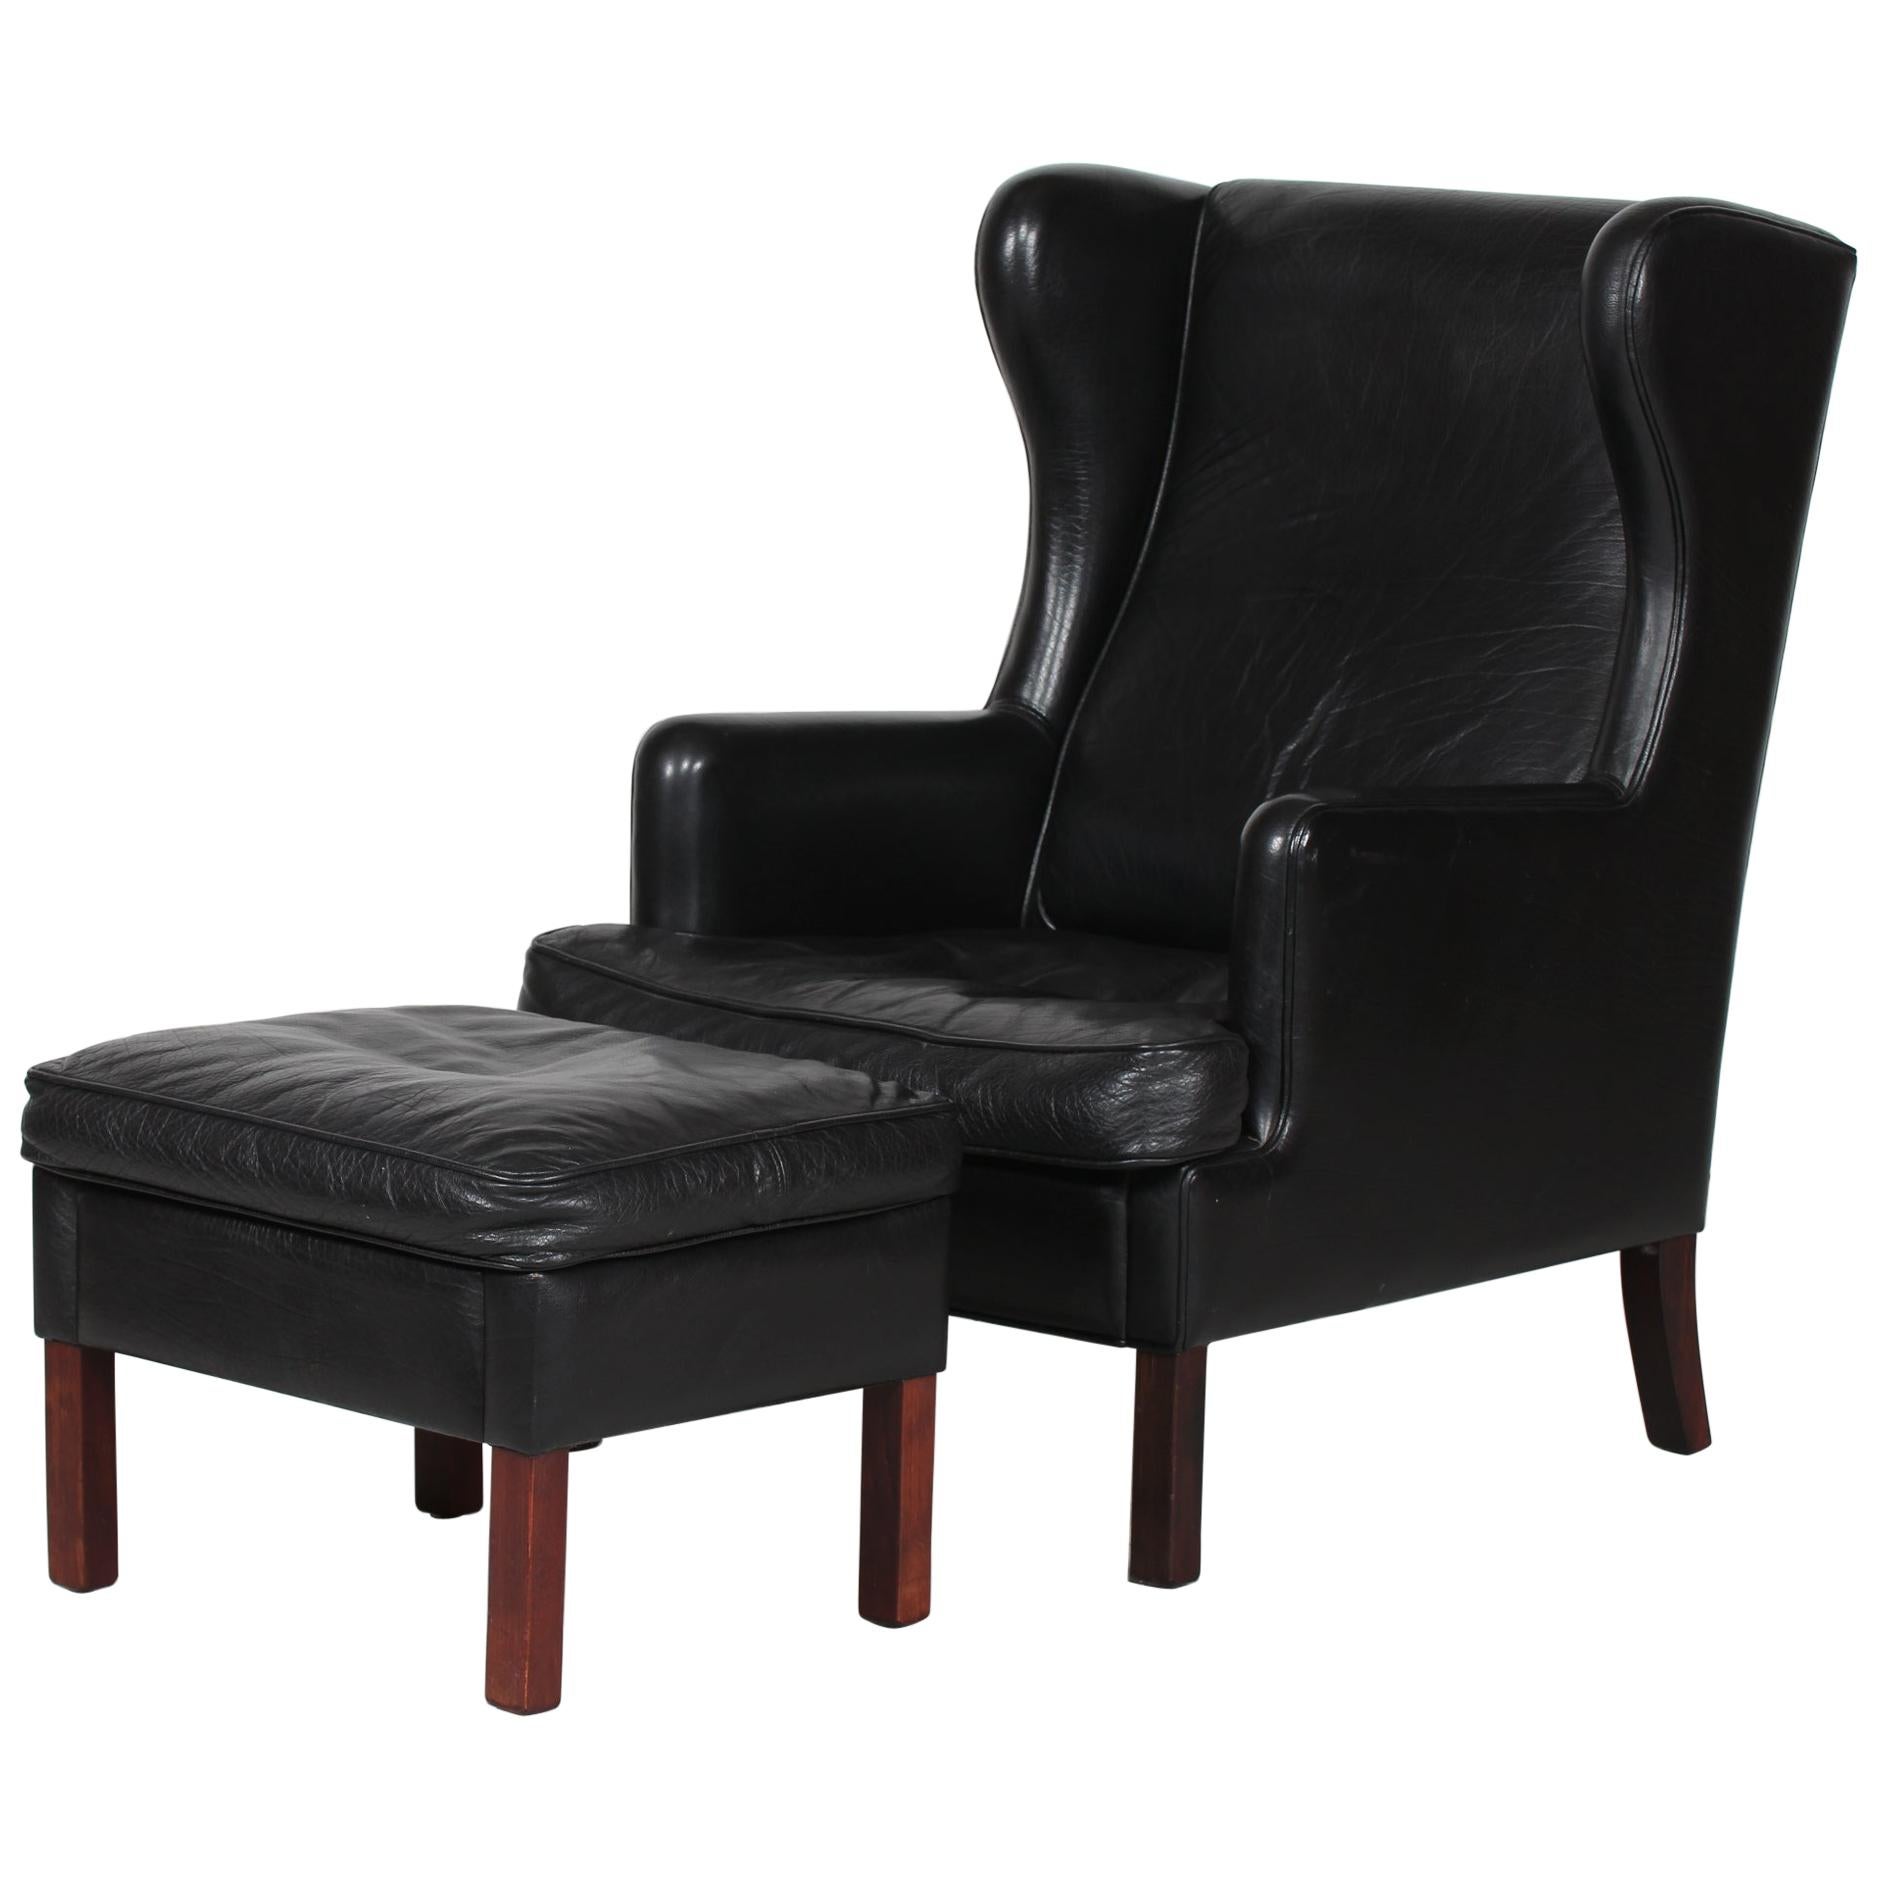 Danish Modern Wingback Chair and Stool with Black Leather in Kaare Klint Style For Sale